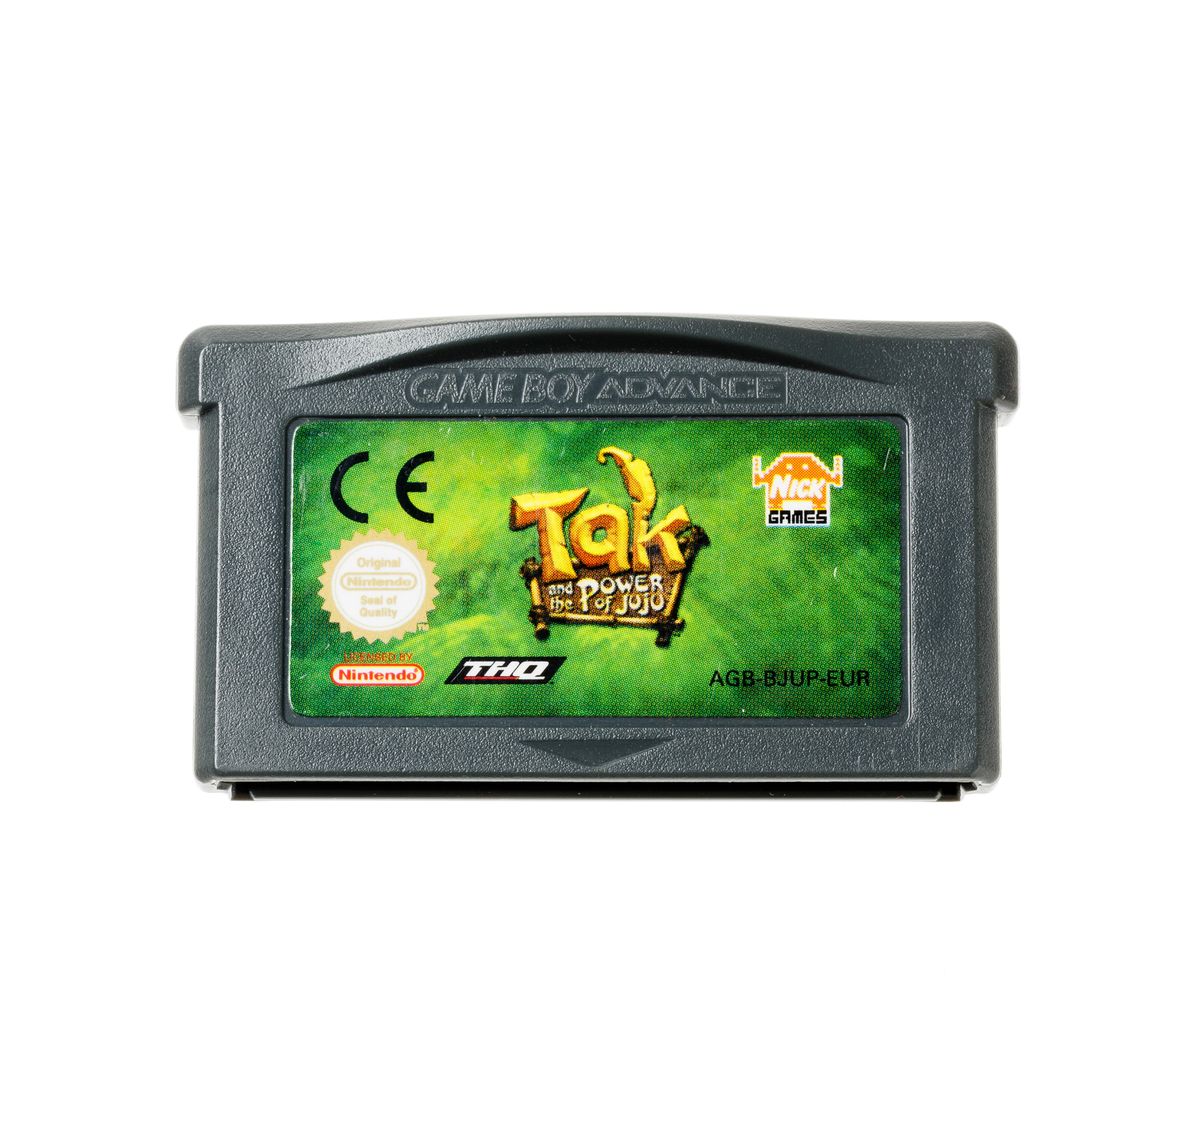 Tak and the Power of JuJu Kopen | Gameboy Advance Games